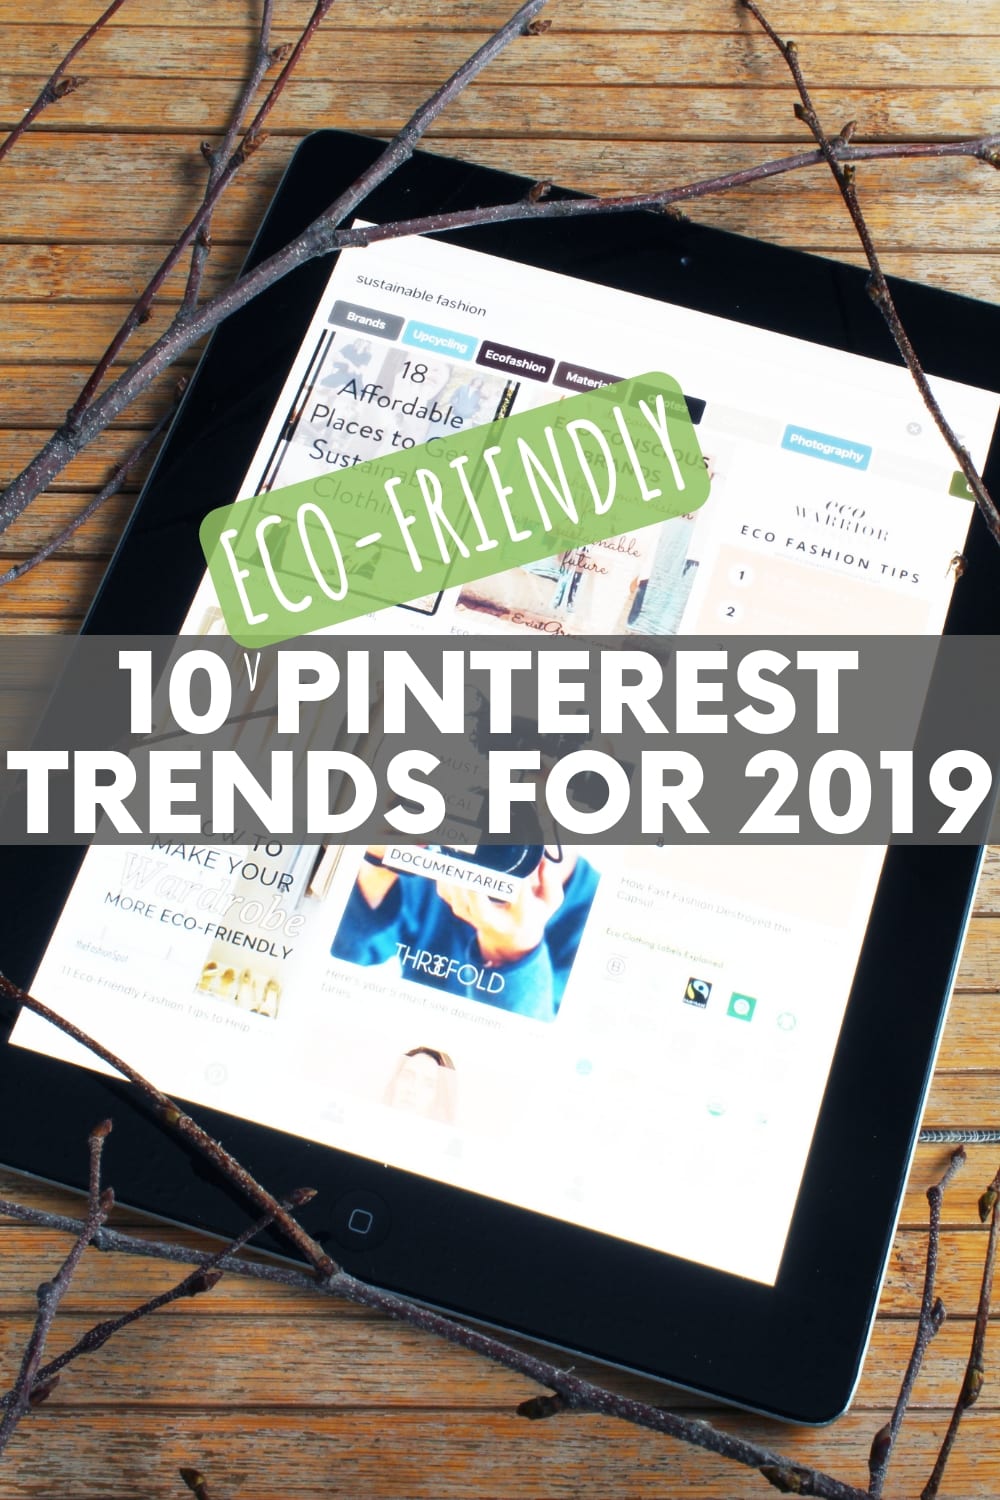 From zero waste travel to sustainable fashion, these 10 current Pinterest trends slant toward one truly inspiring ambition - being more green!